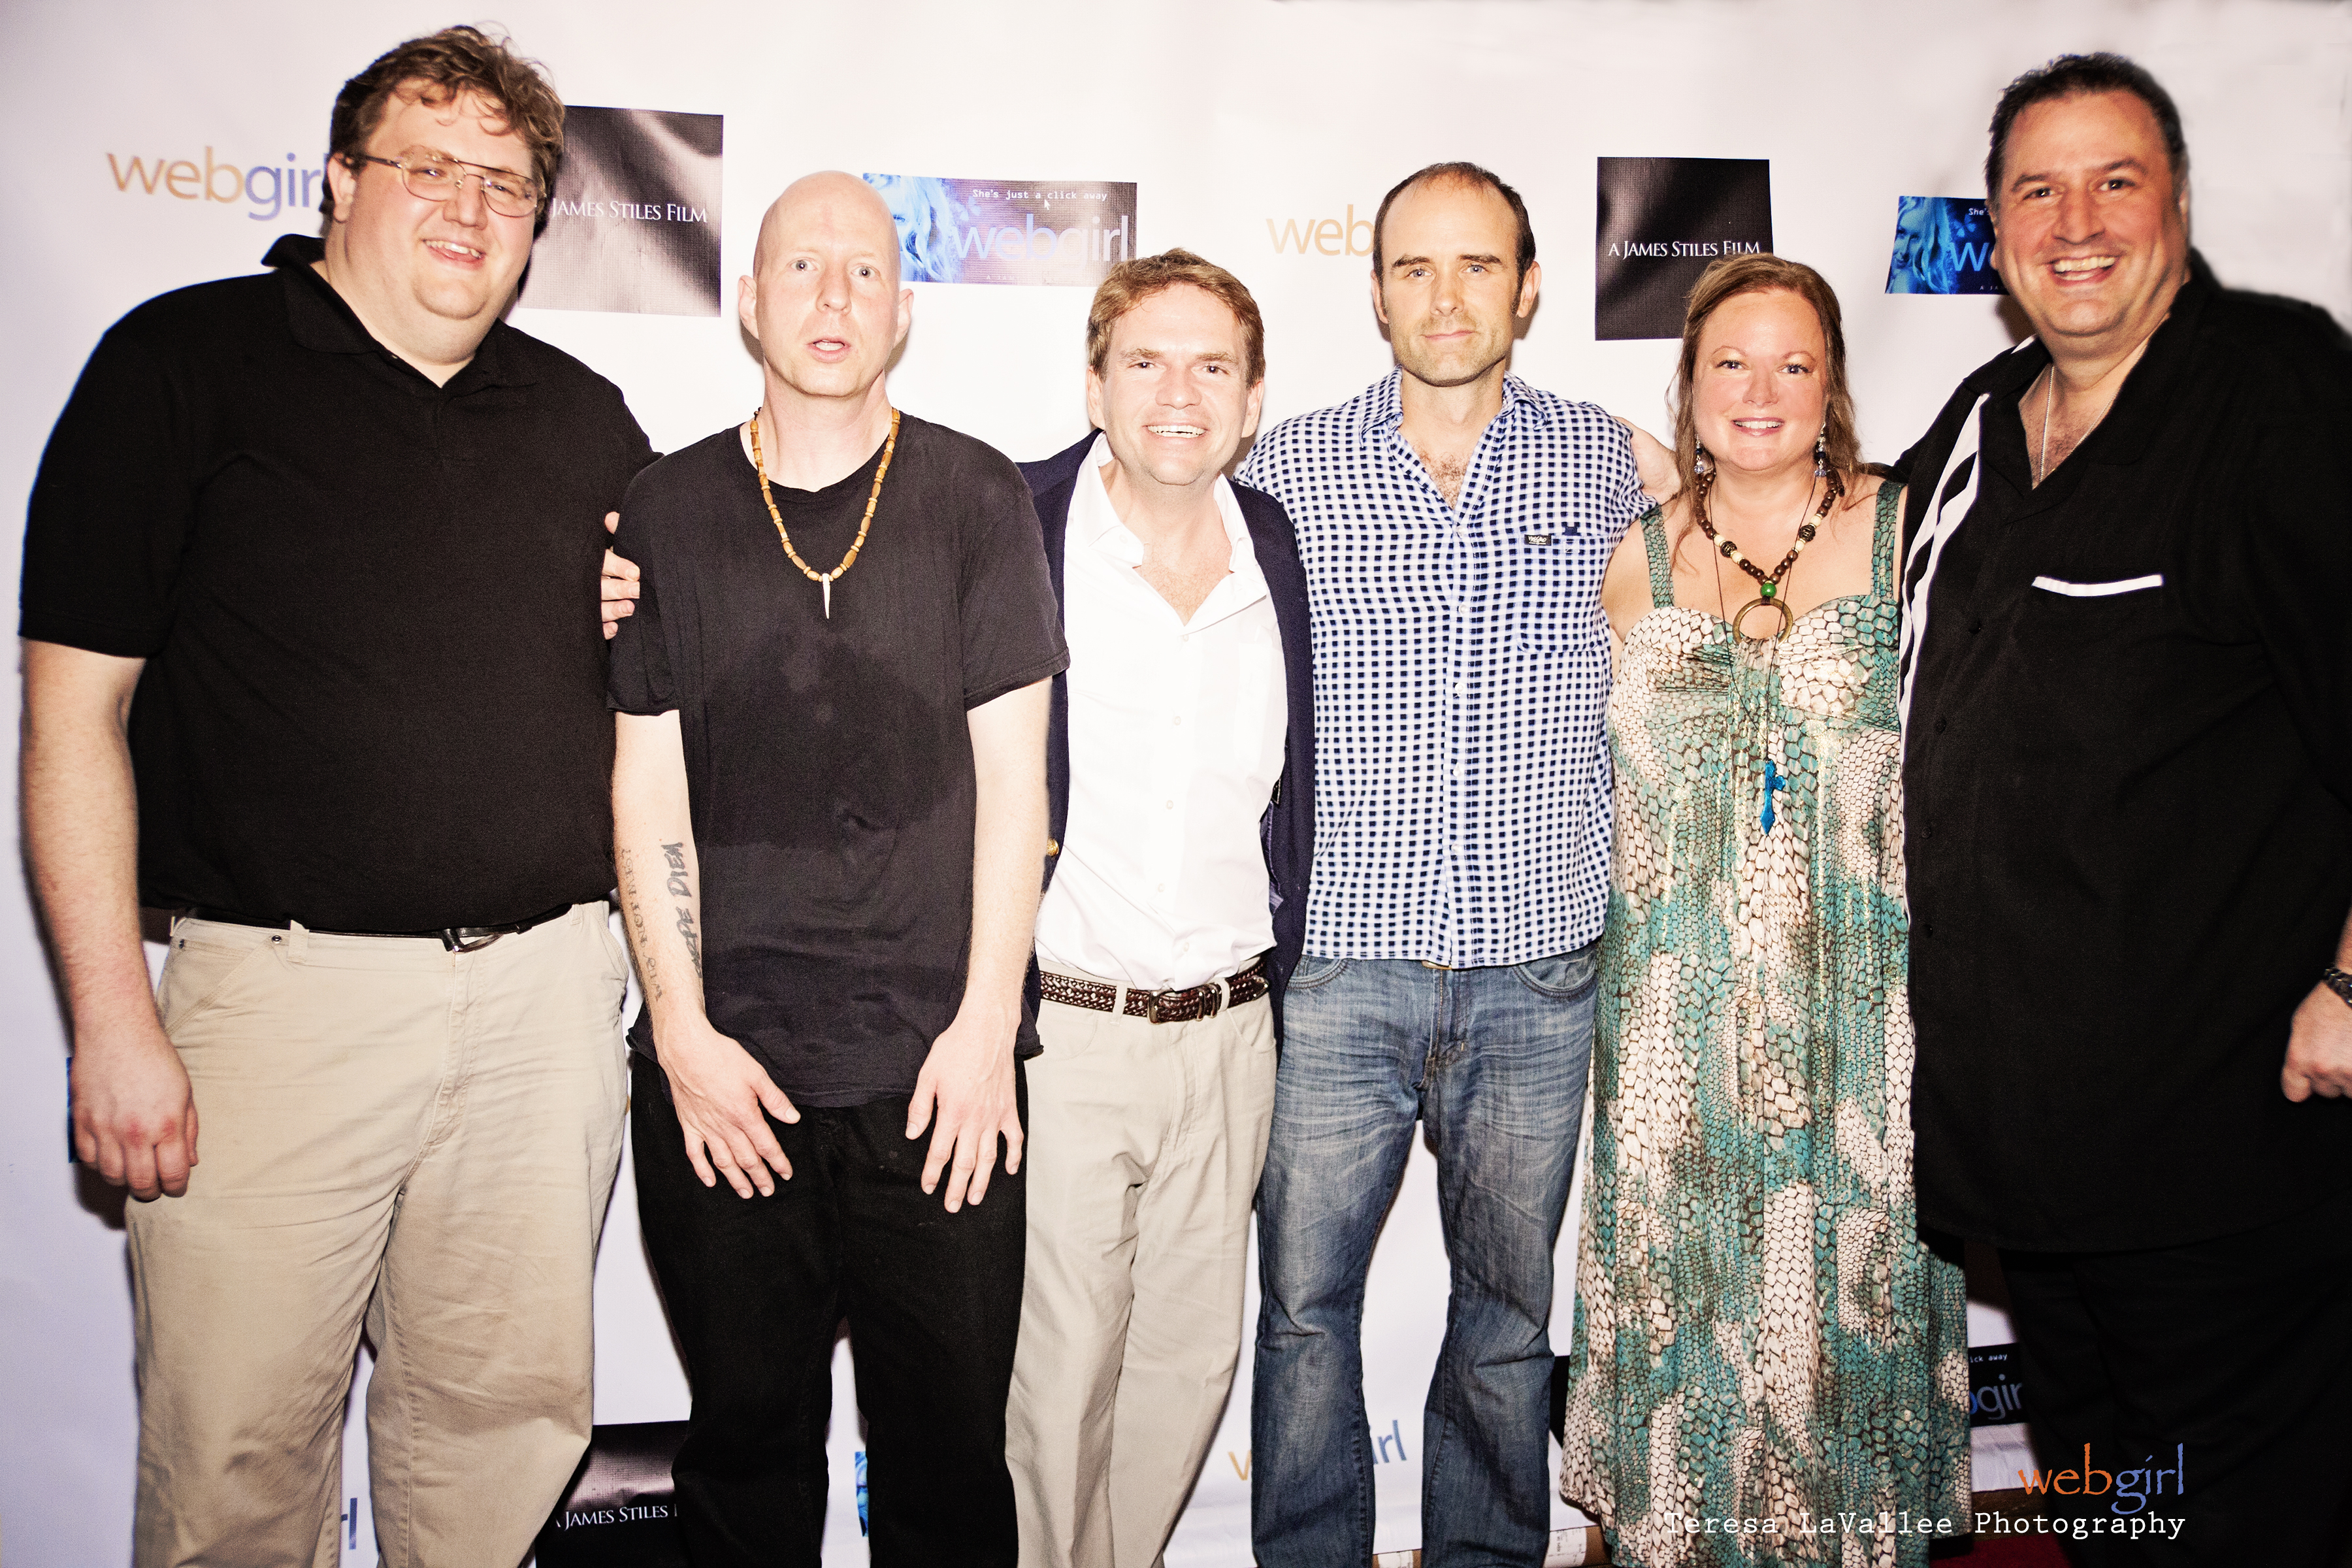 Webgirl after-party. Third from right. With Josh Meader, Jason LeBlanc, James Stiles, Amanda Landry, and Joe Jafo Carriere.